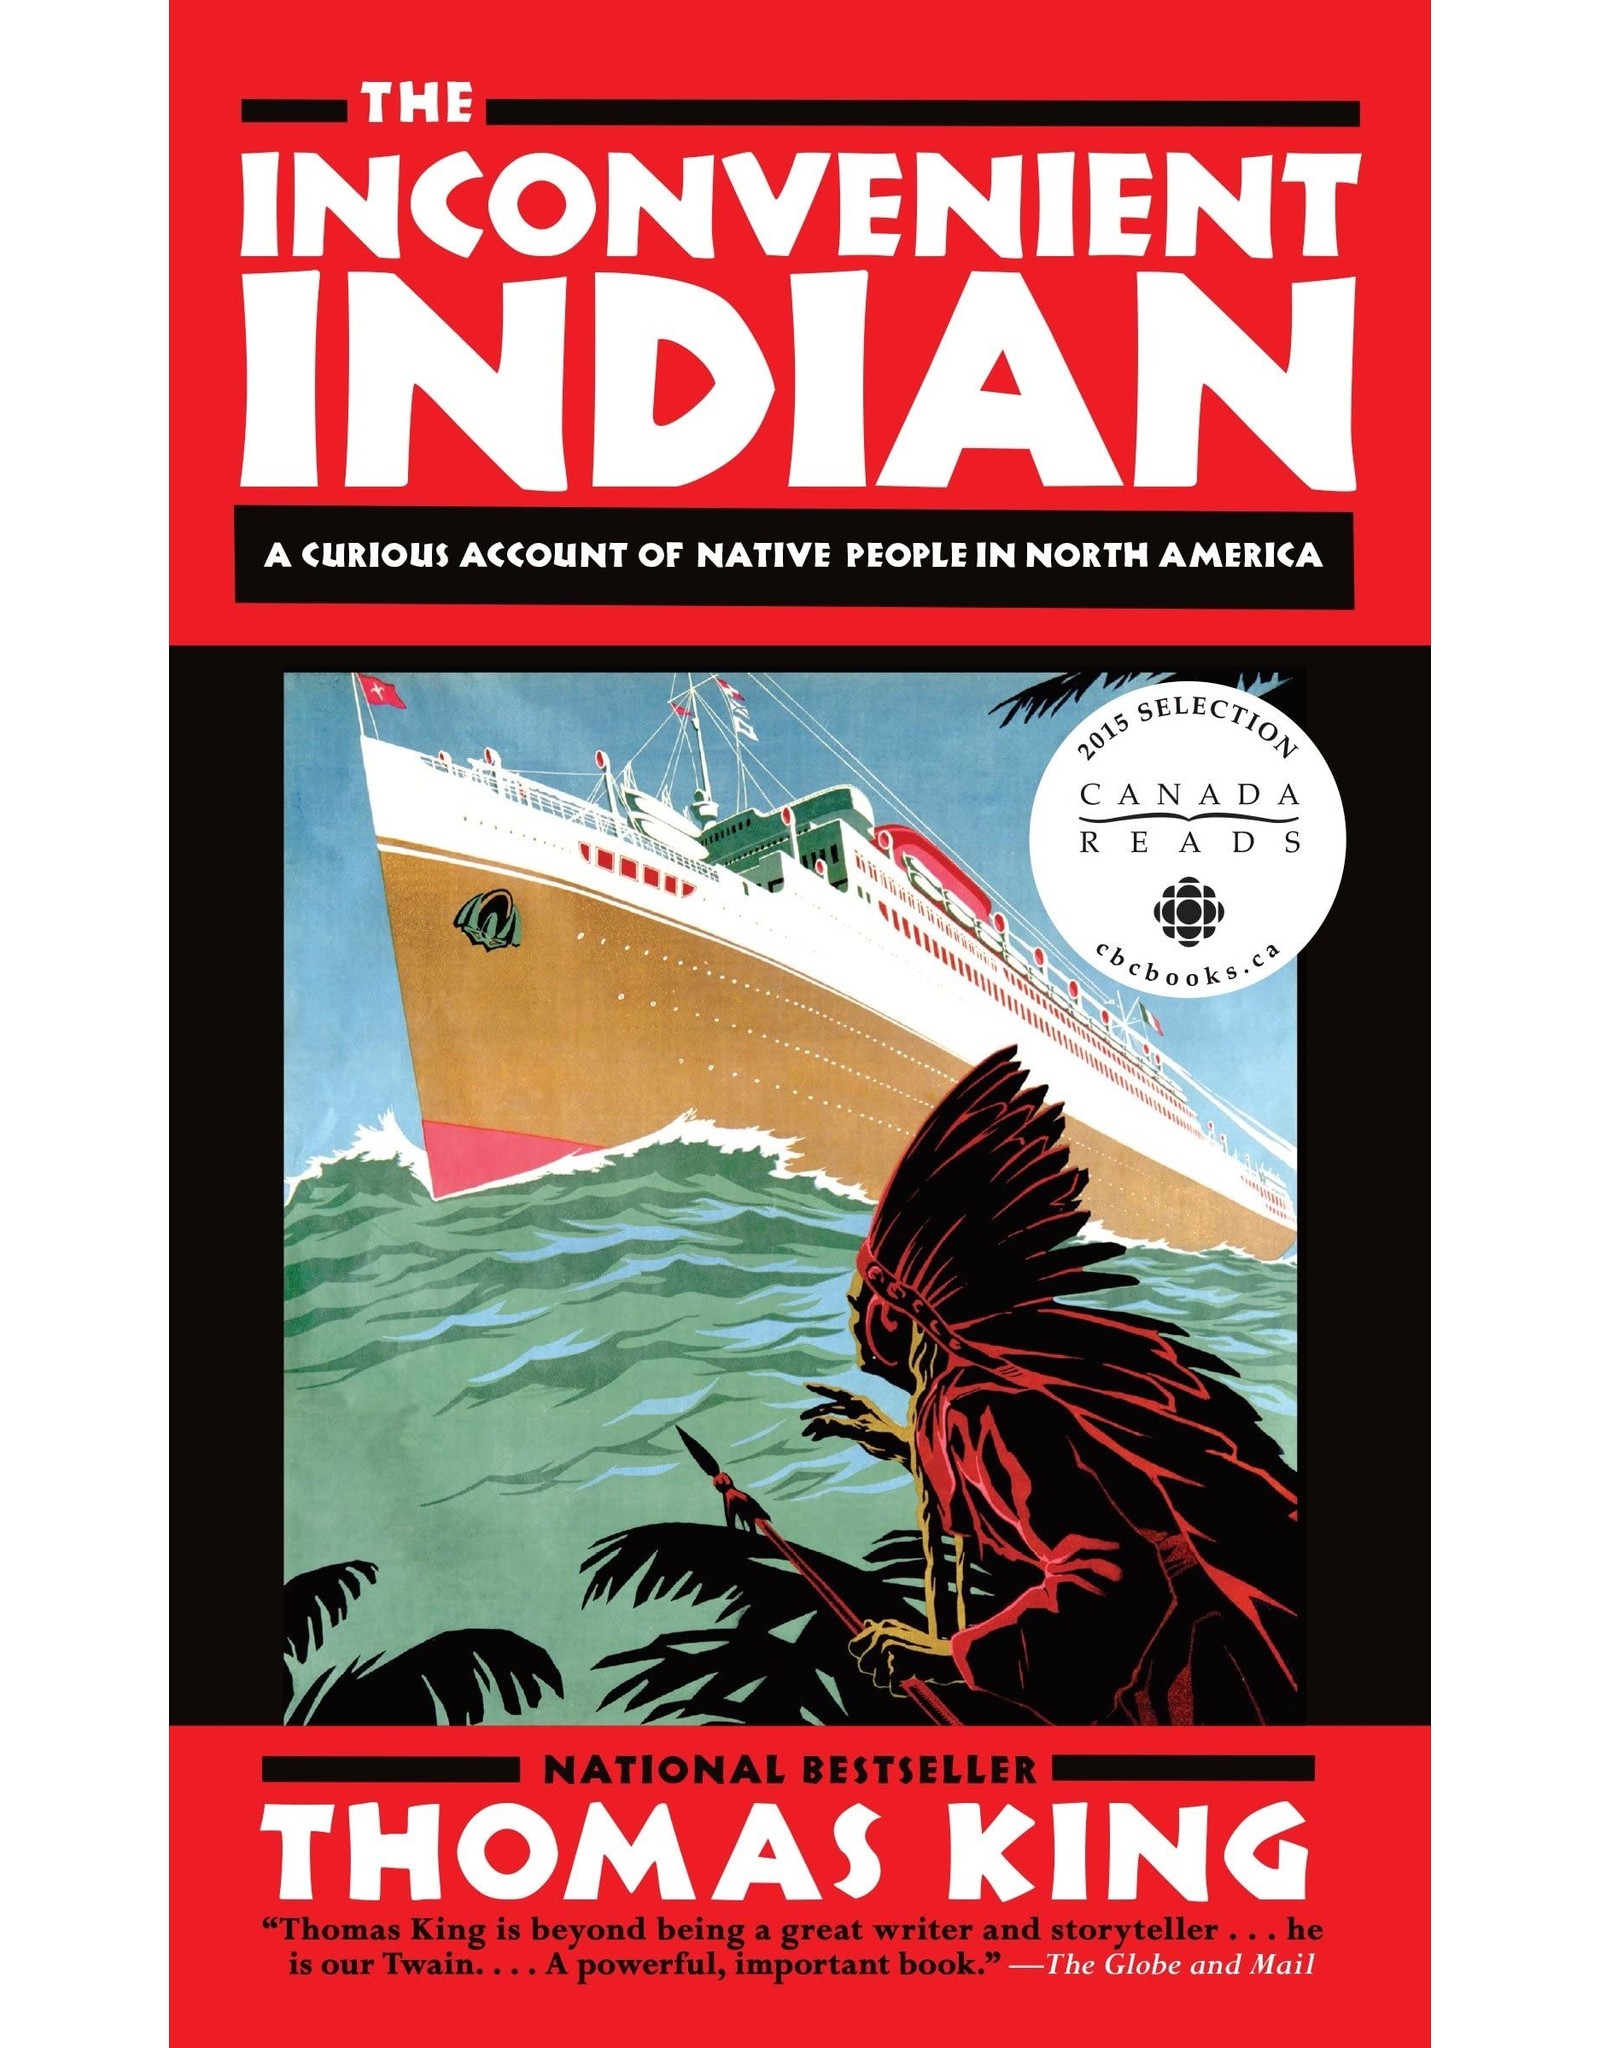 Textbook The Inconvenient Indian: A Curious Account of Native People in North America